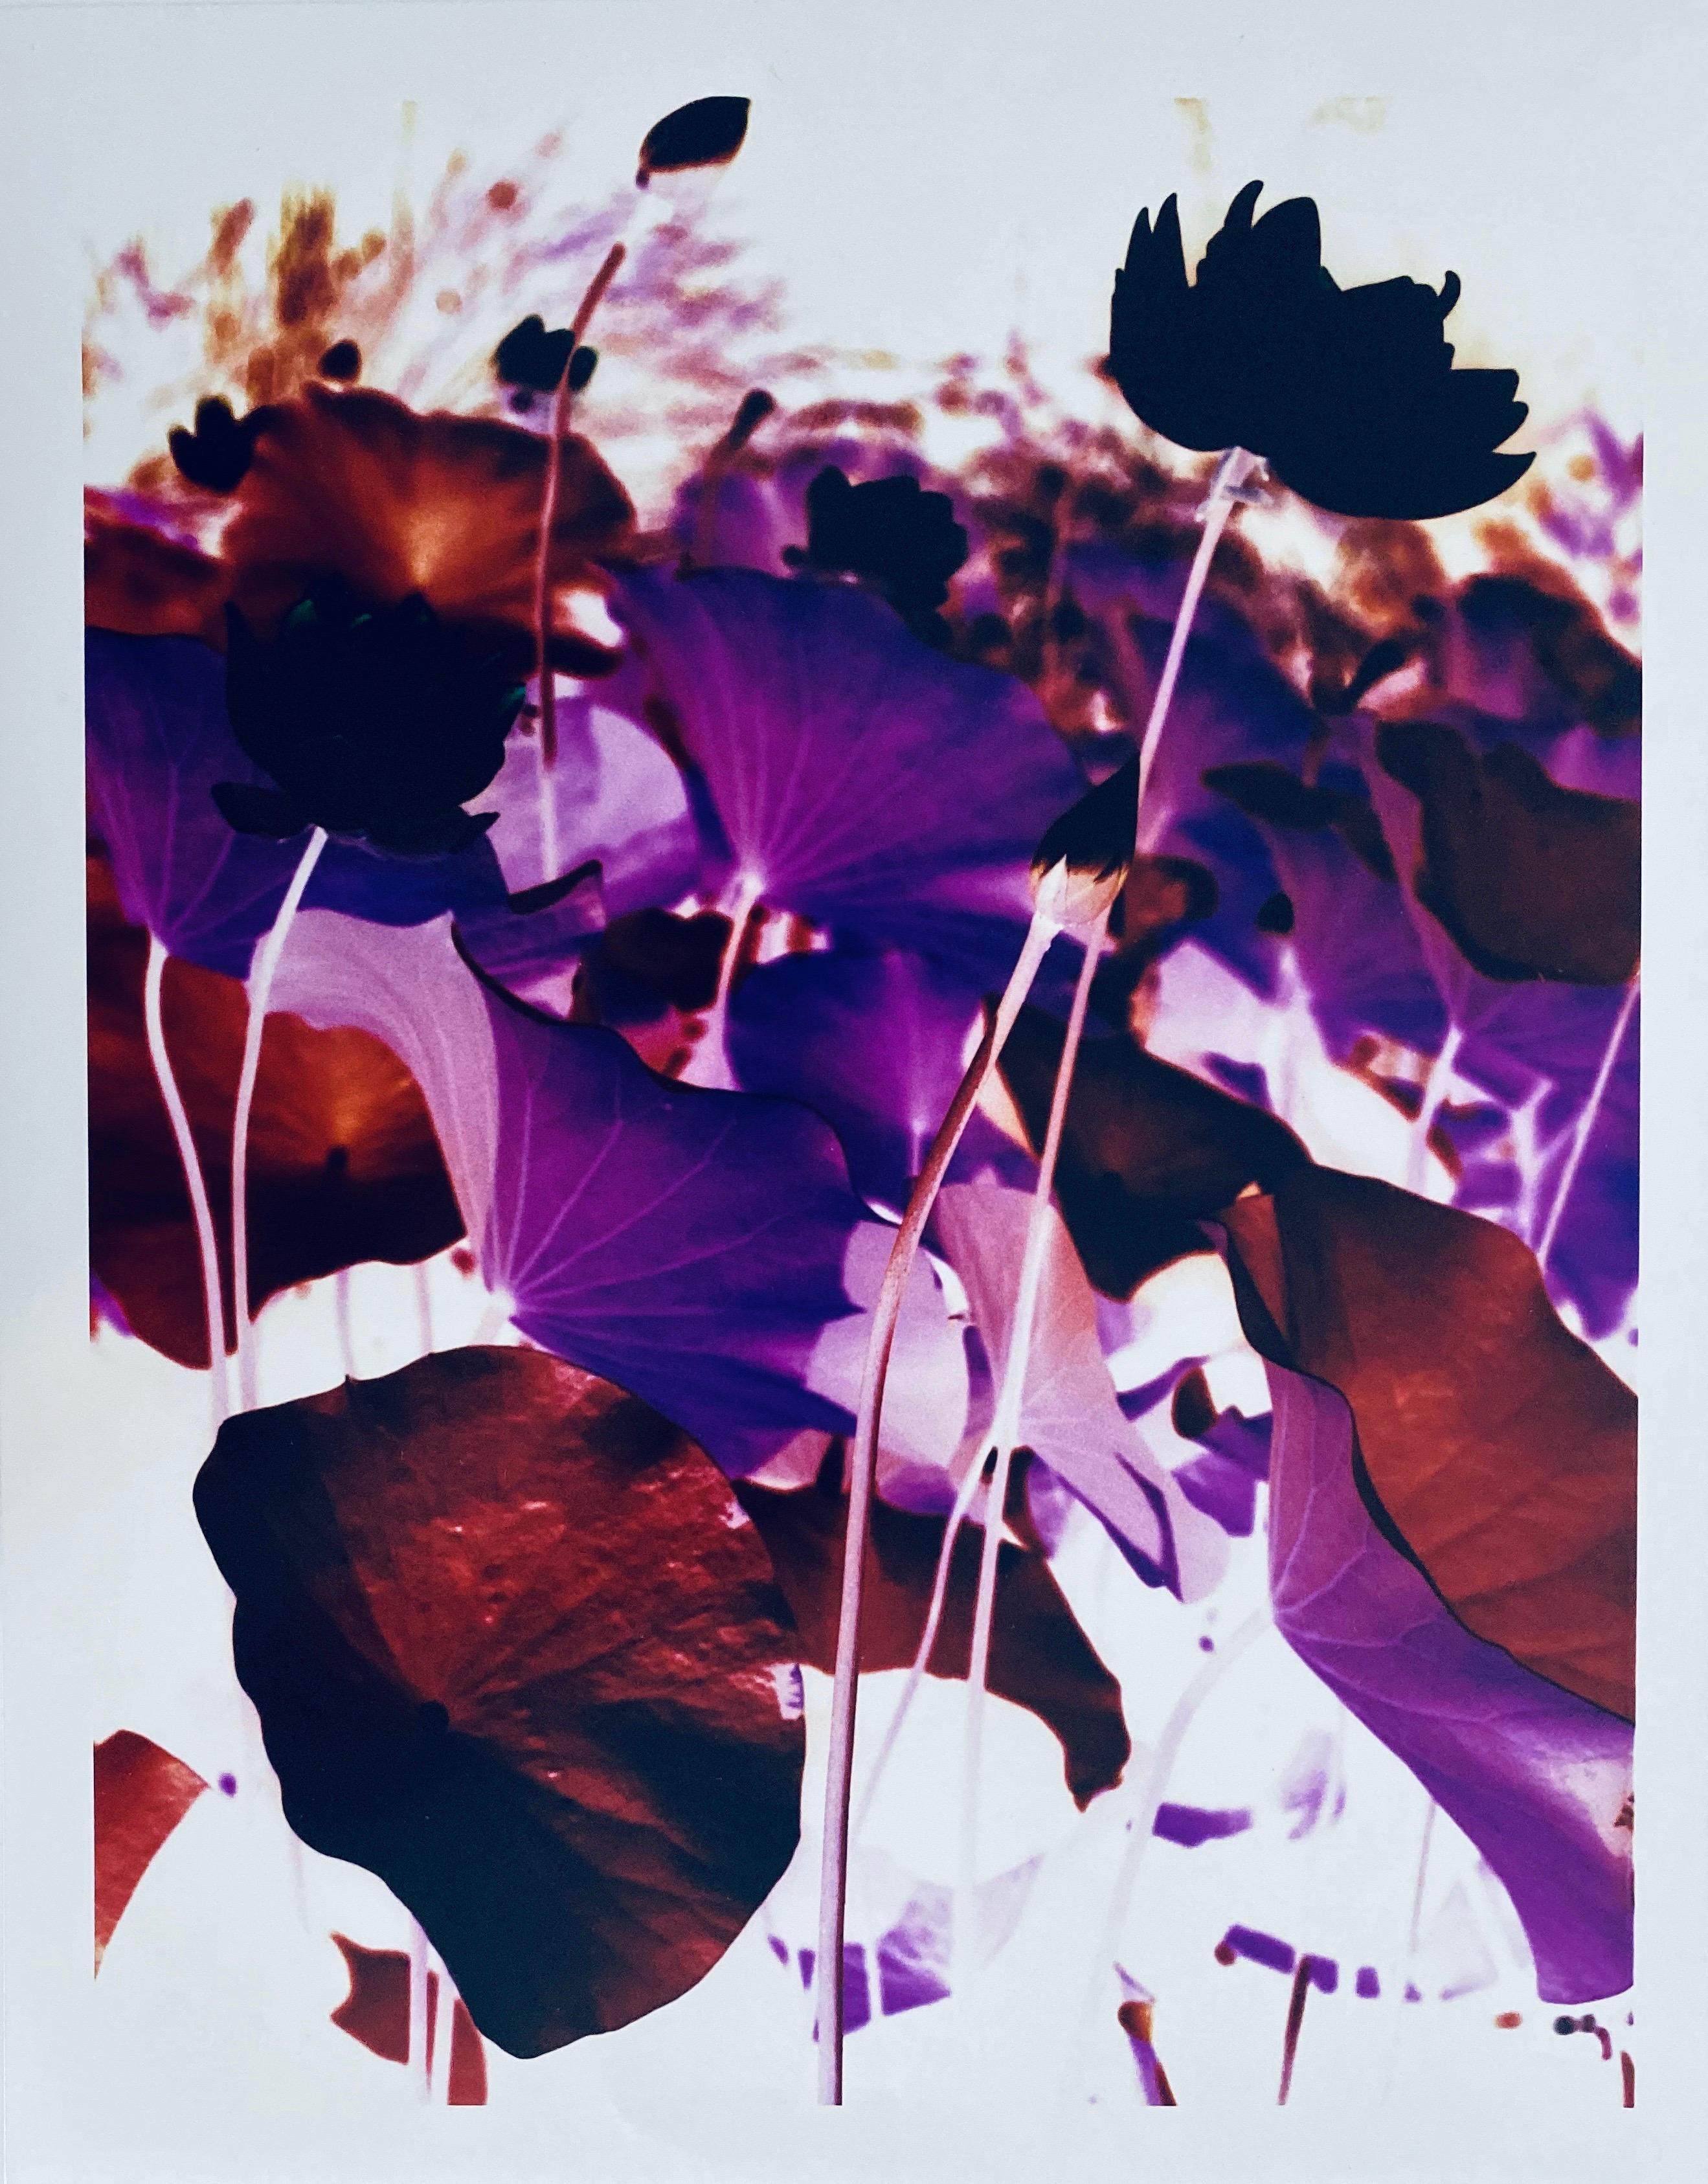 Jeffrey Rothstein Abstract Photograph - Flora Fauna Series Vintage Color Photograph Abstract Flower Fuji Crystal Photo